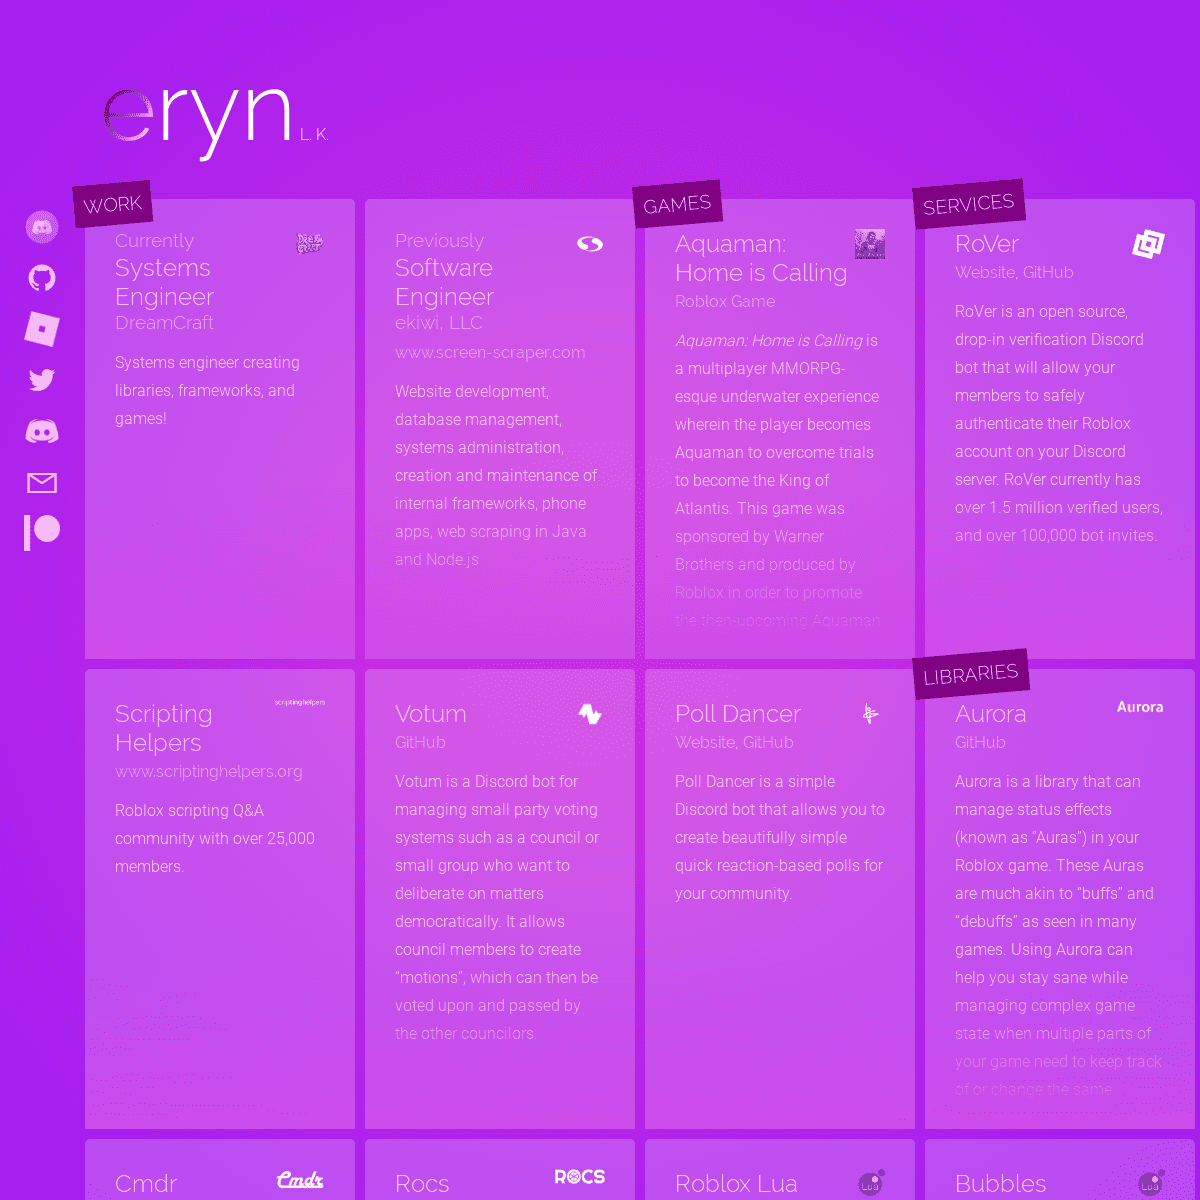 A complete backup of eryn.io